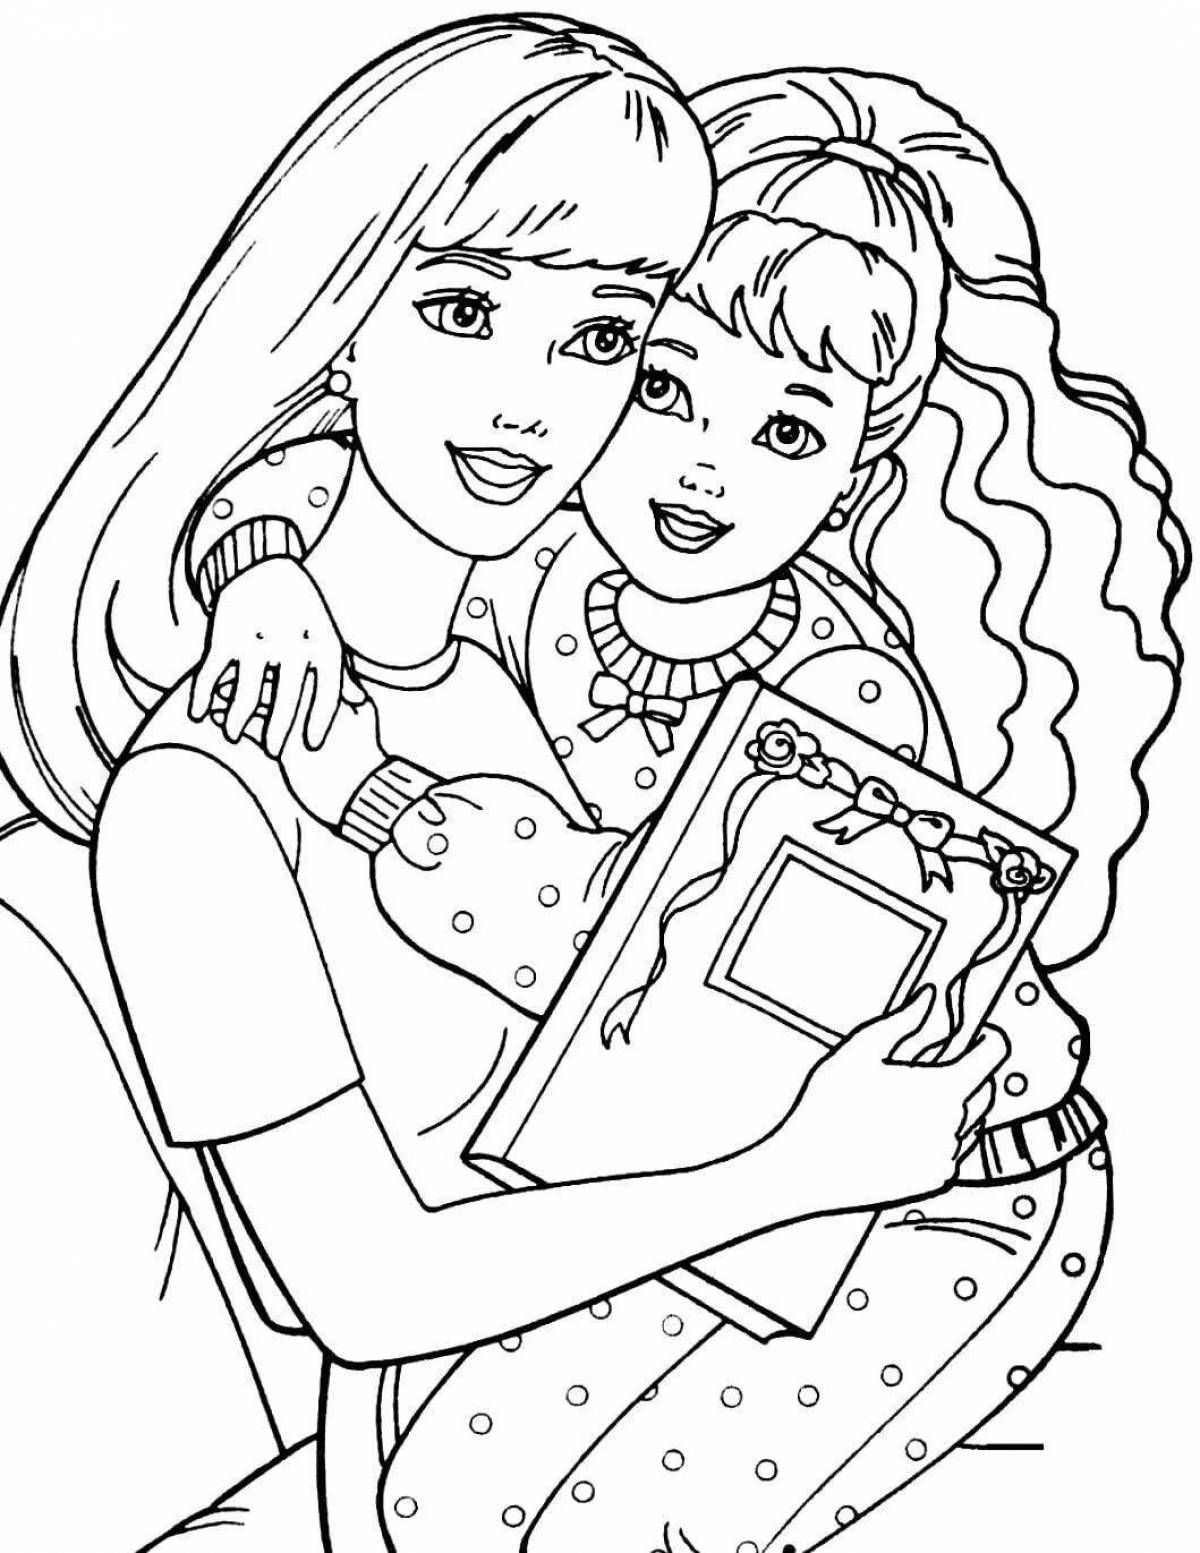 Coloring page blissful barbie and daughter